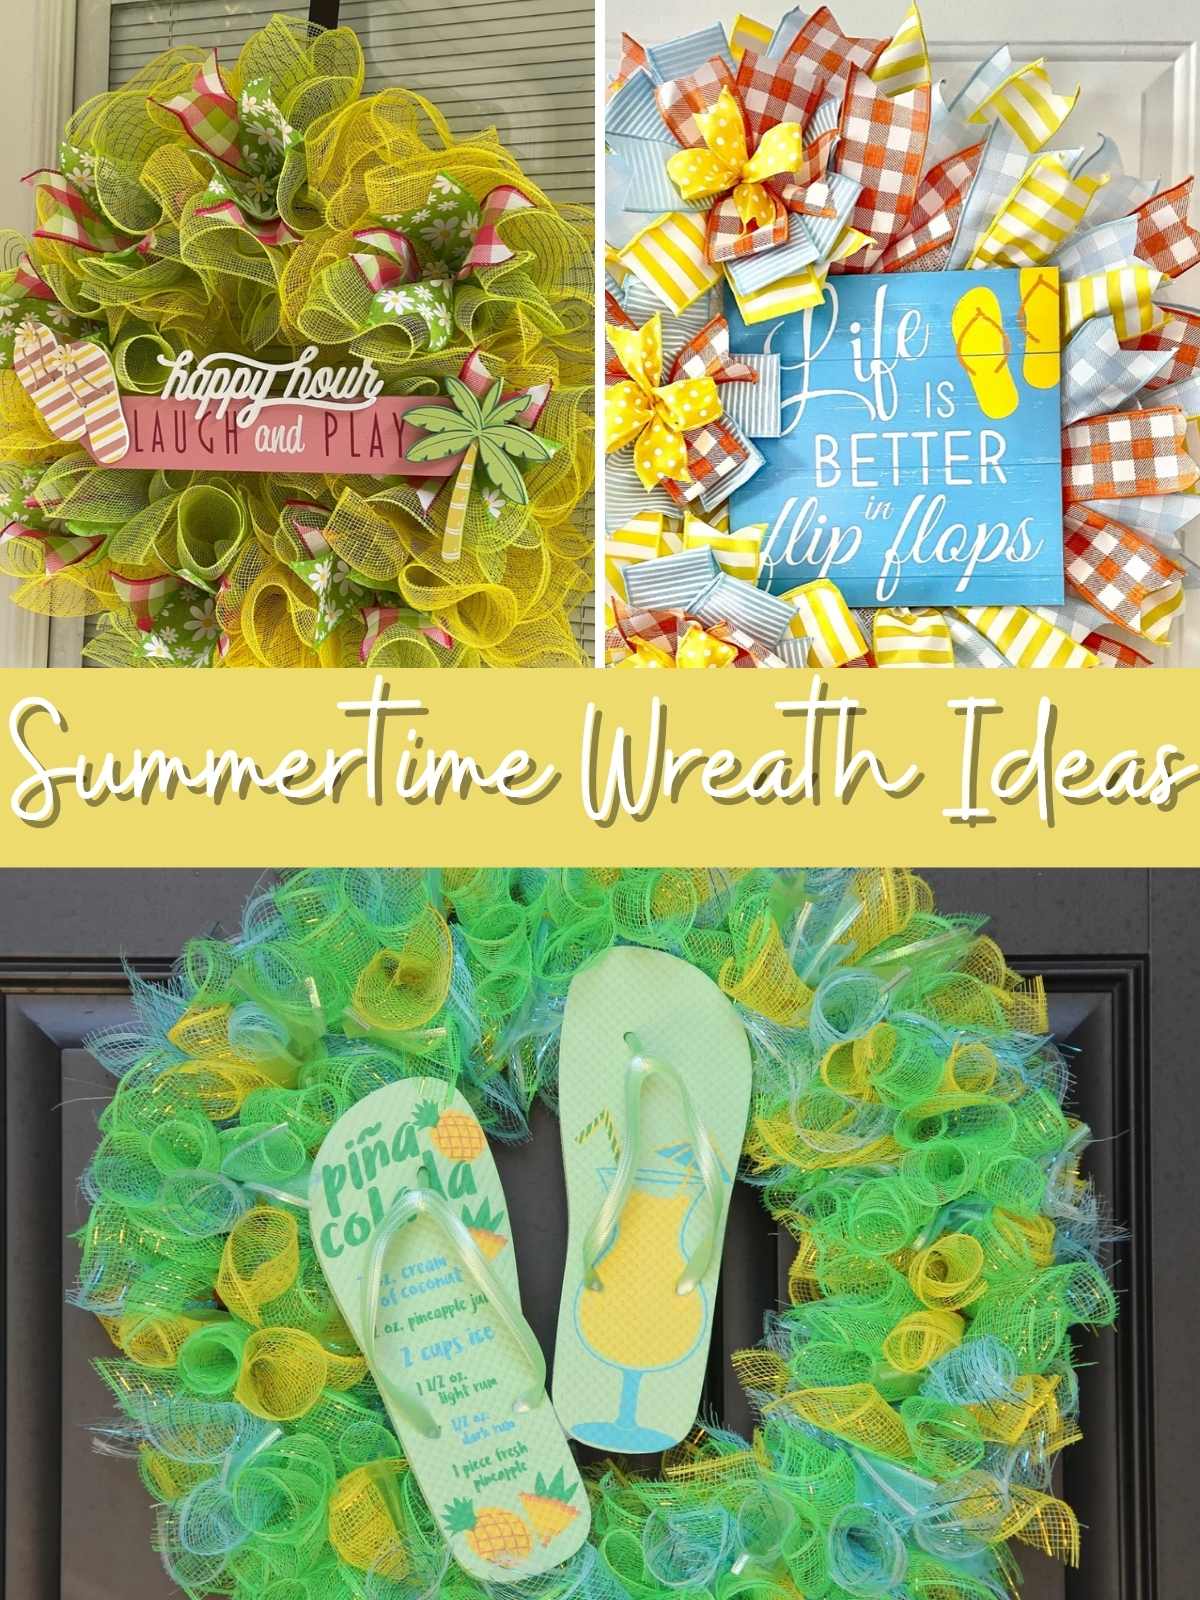 Summertime wreath ideas with 3 bright wreath examples.